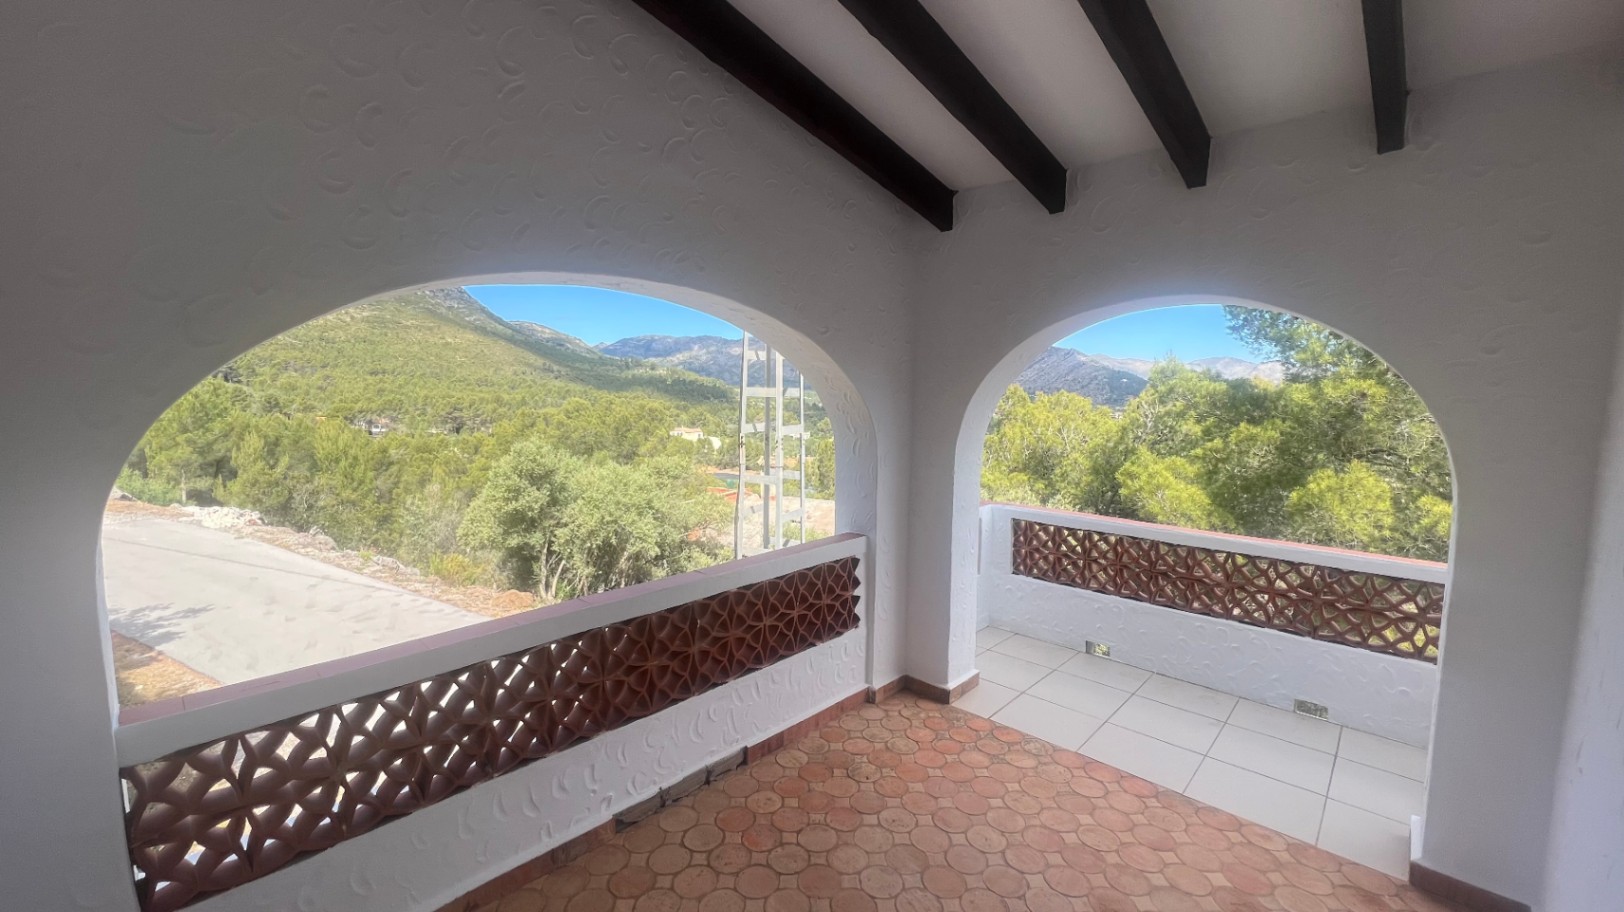 For sale in Parcent: private villa with open views